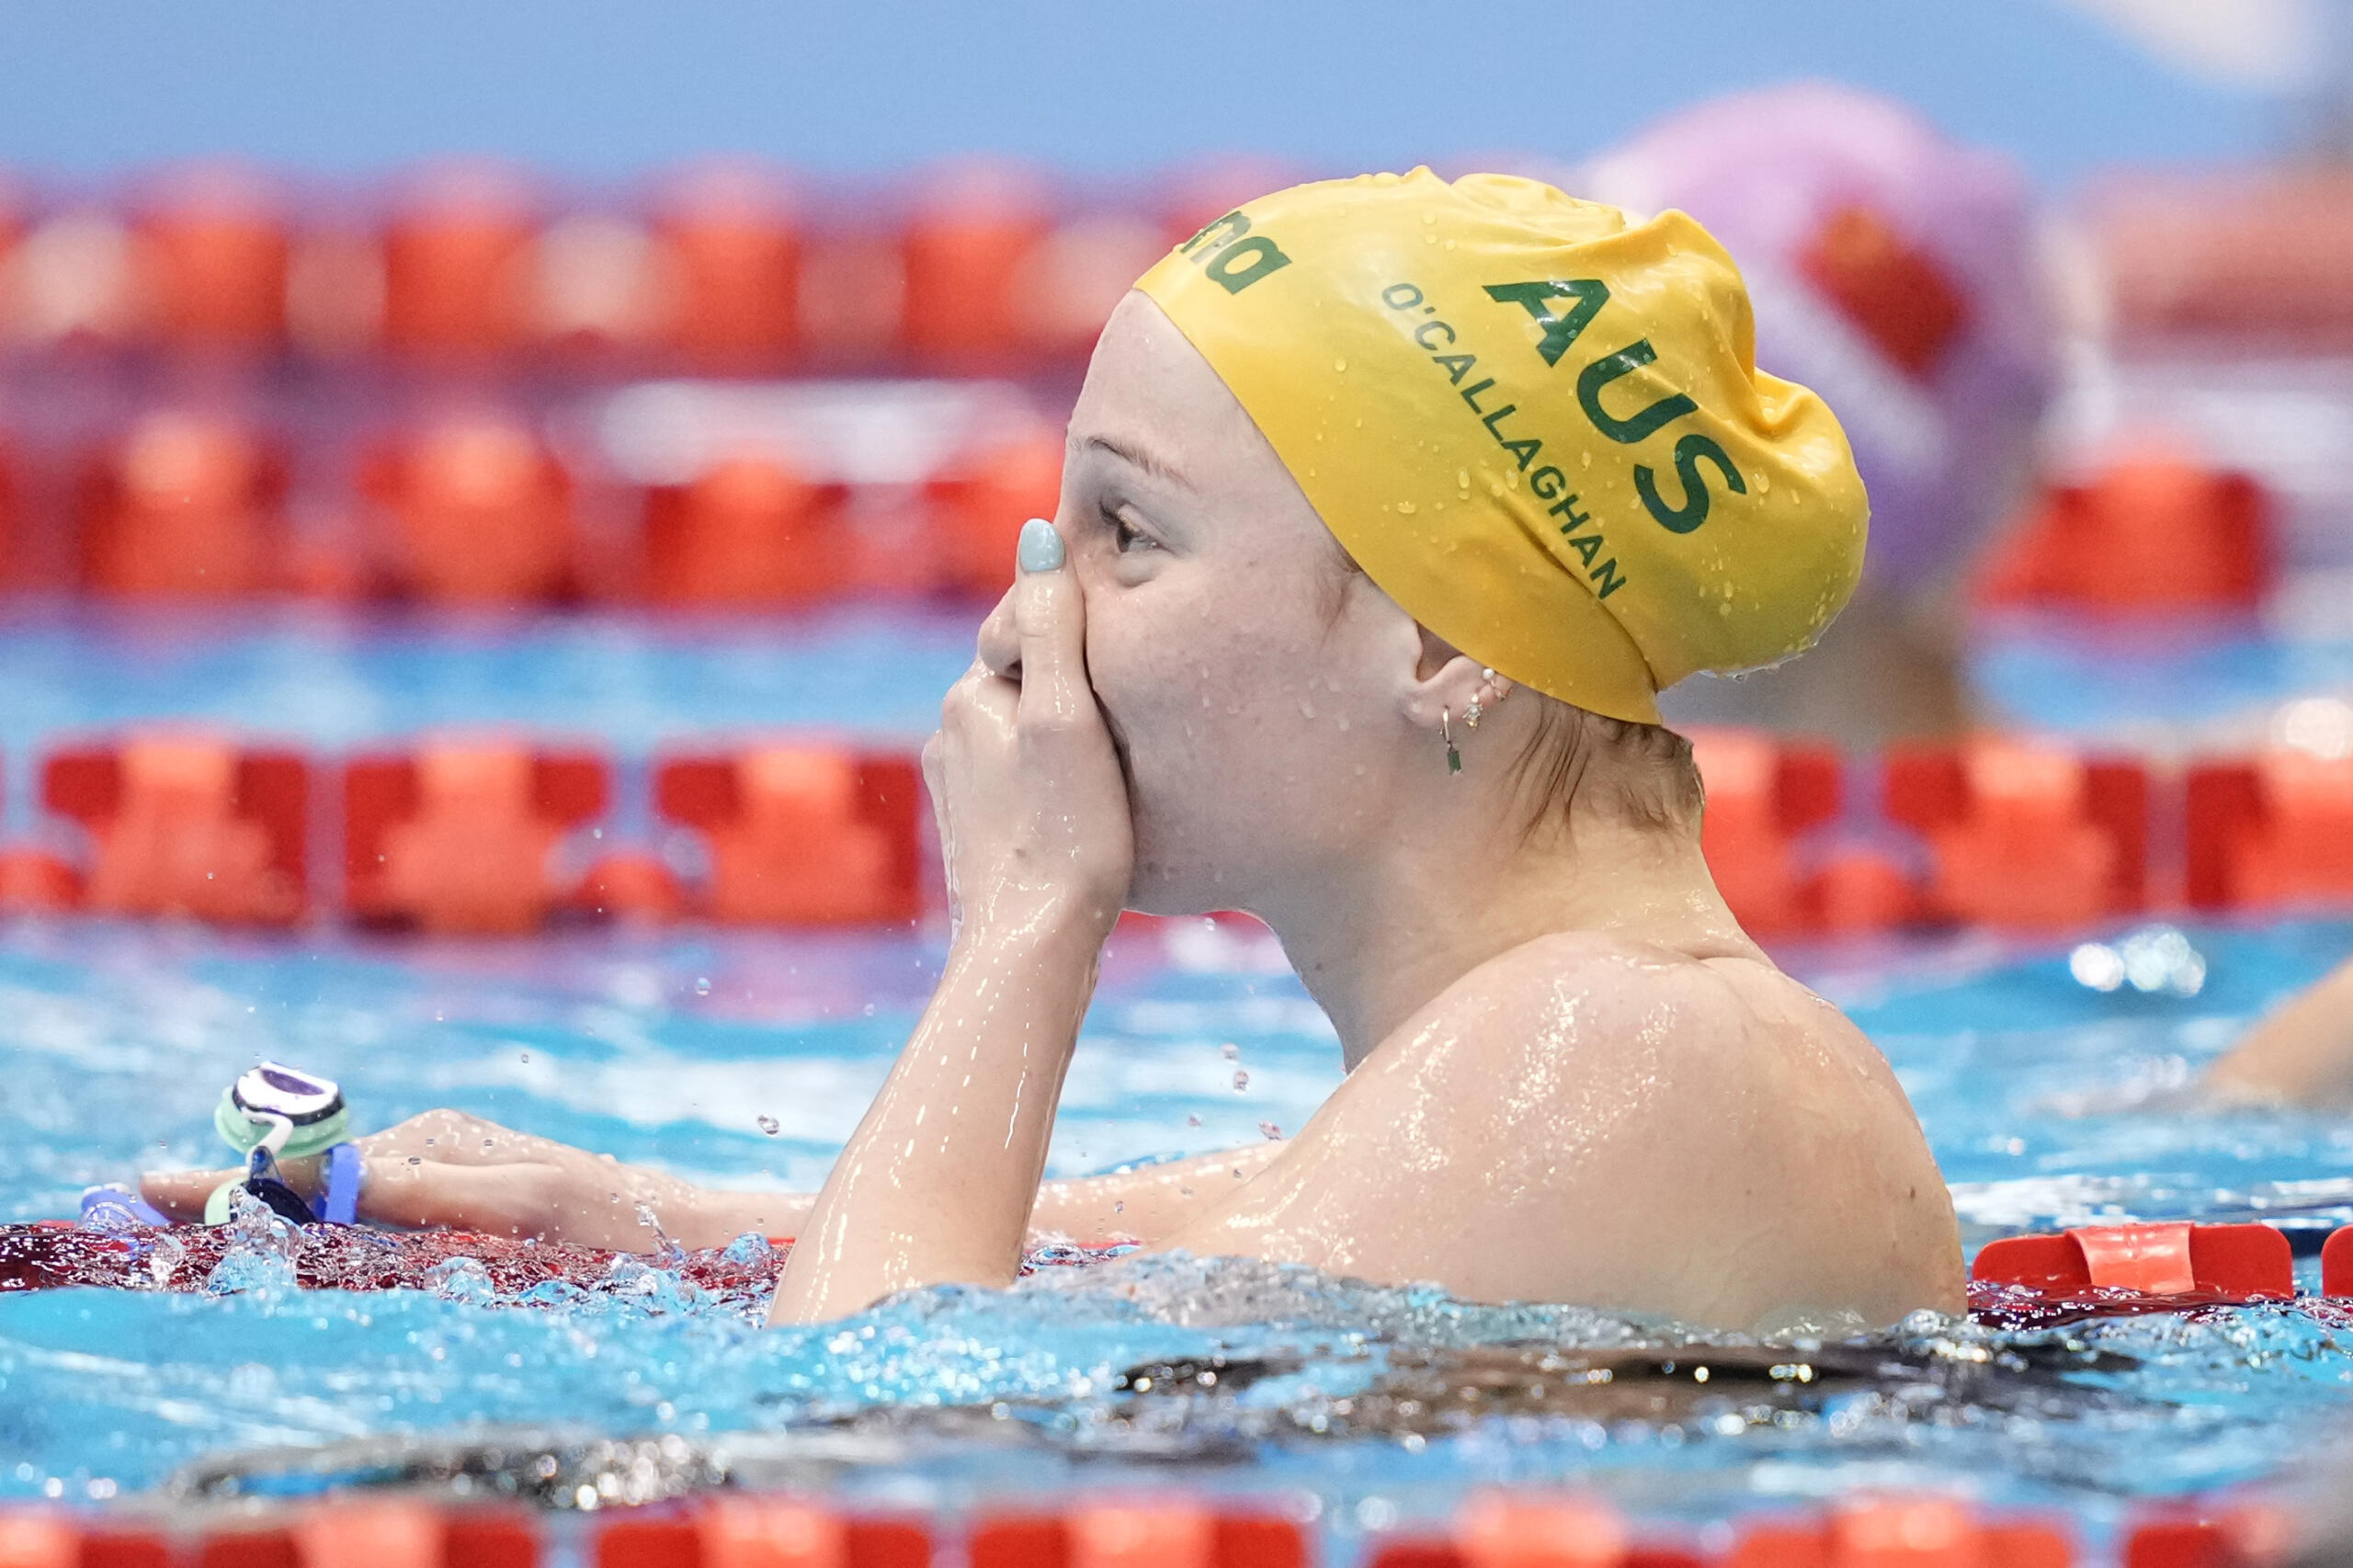 Mollie O'Callaghan of Australia reacts after winning the women's 200m freestyle swimming final at the World Swimming Championships in Fukuoka, Japan, Wednesday, July 26, 2023.